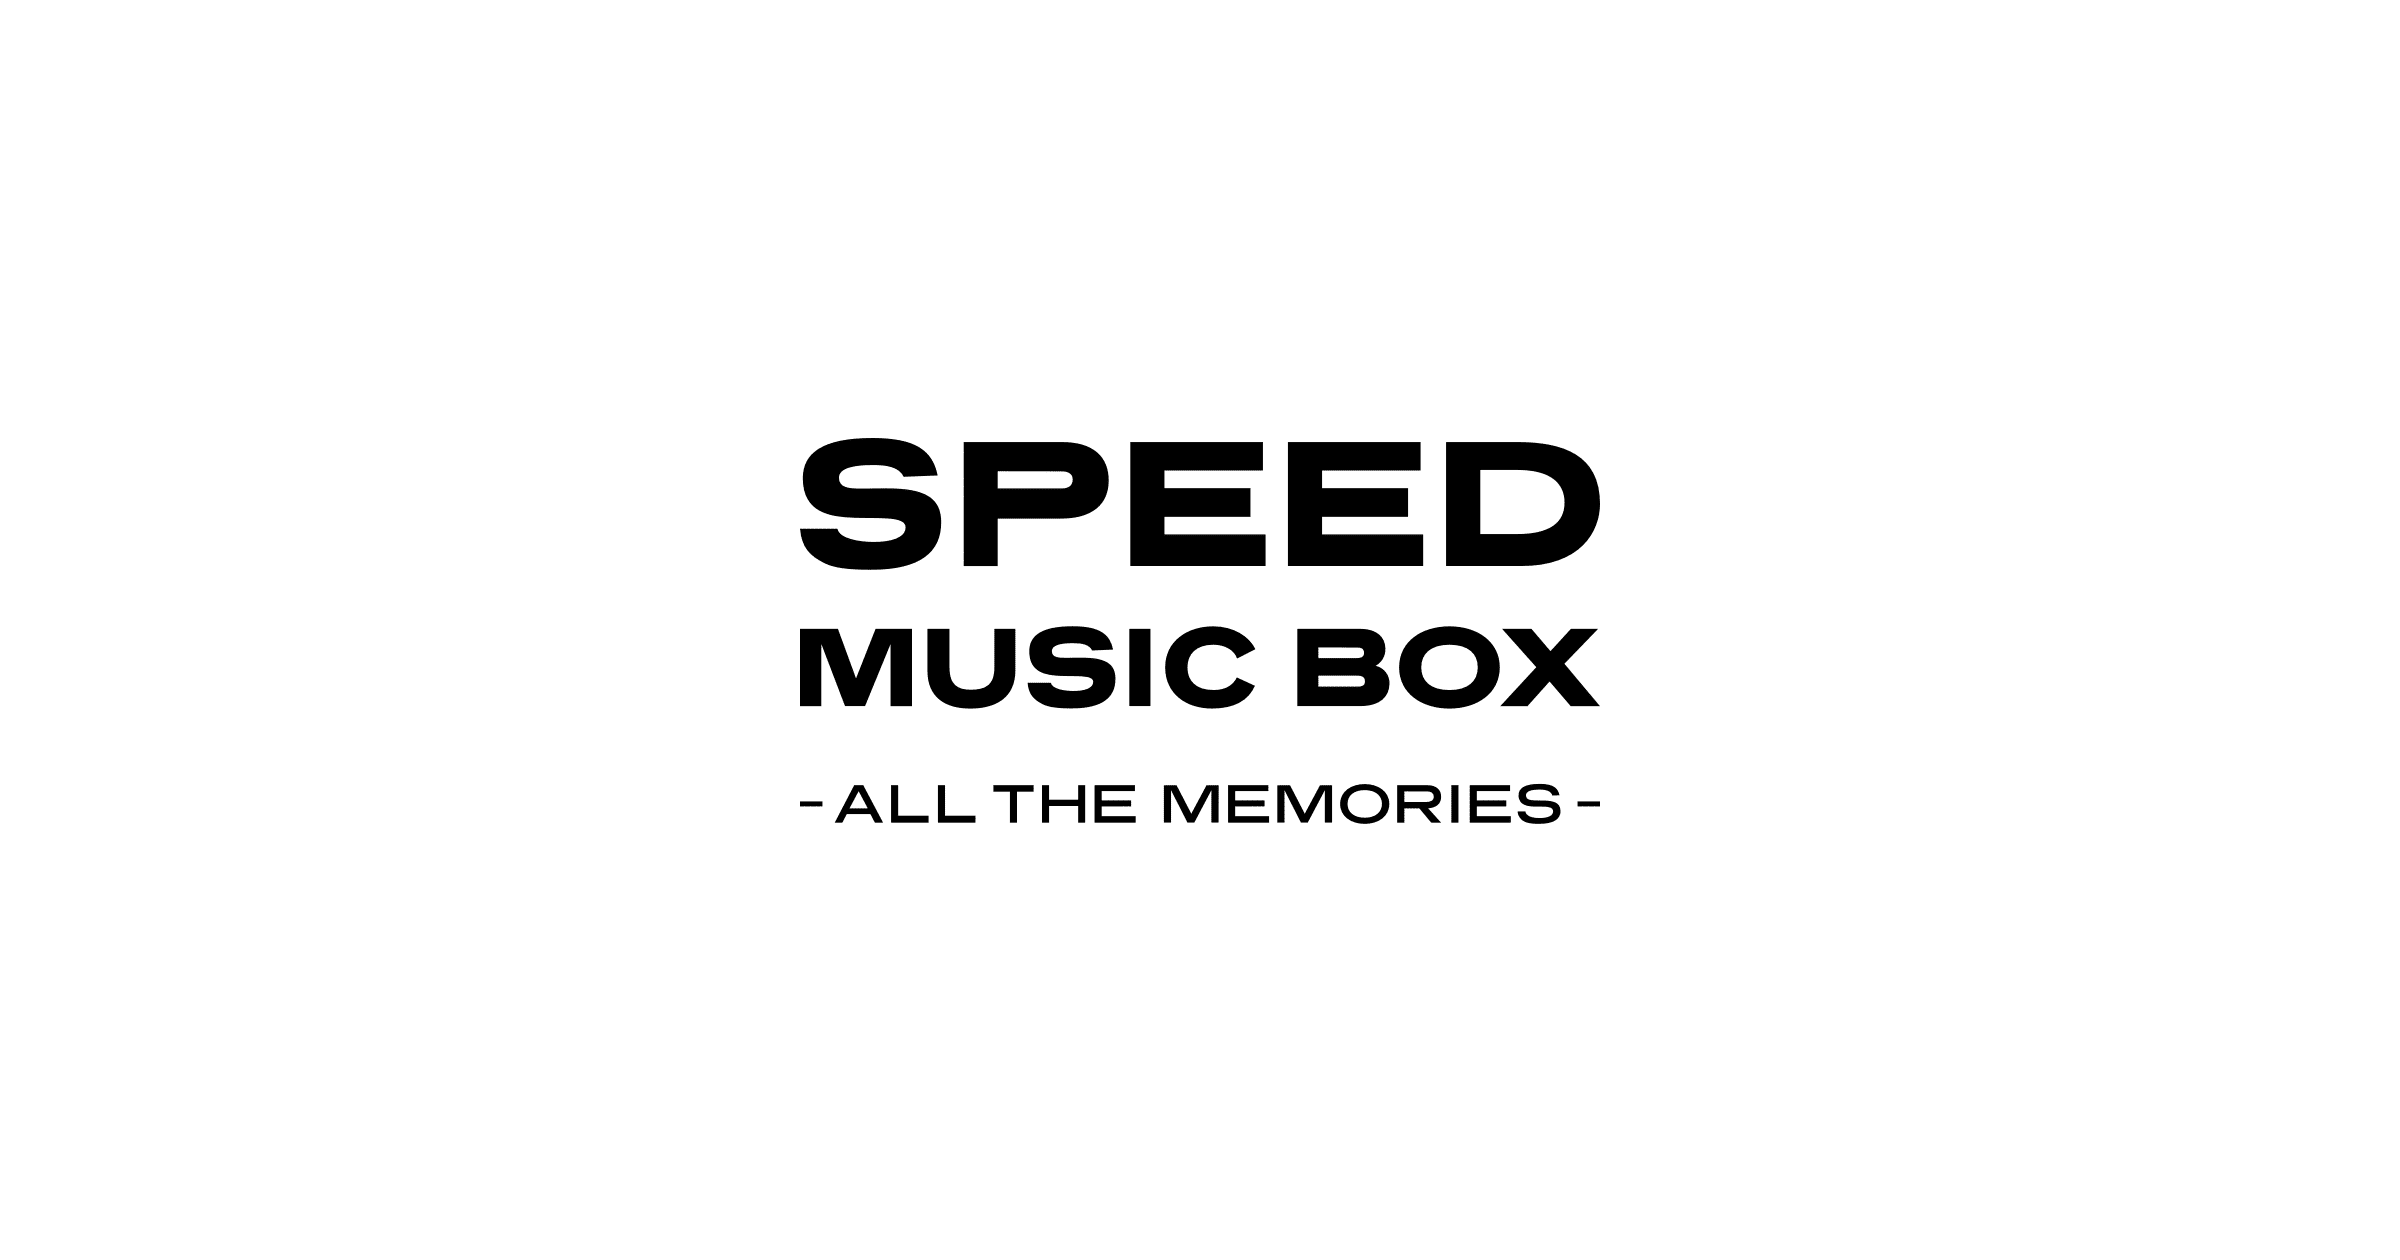 SPEED MUSIC BOX -ALL THE MEMORIES-